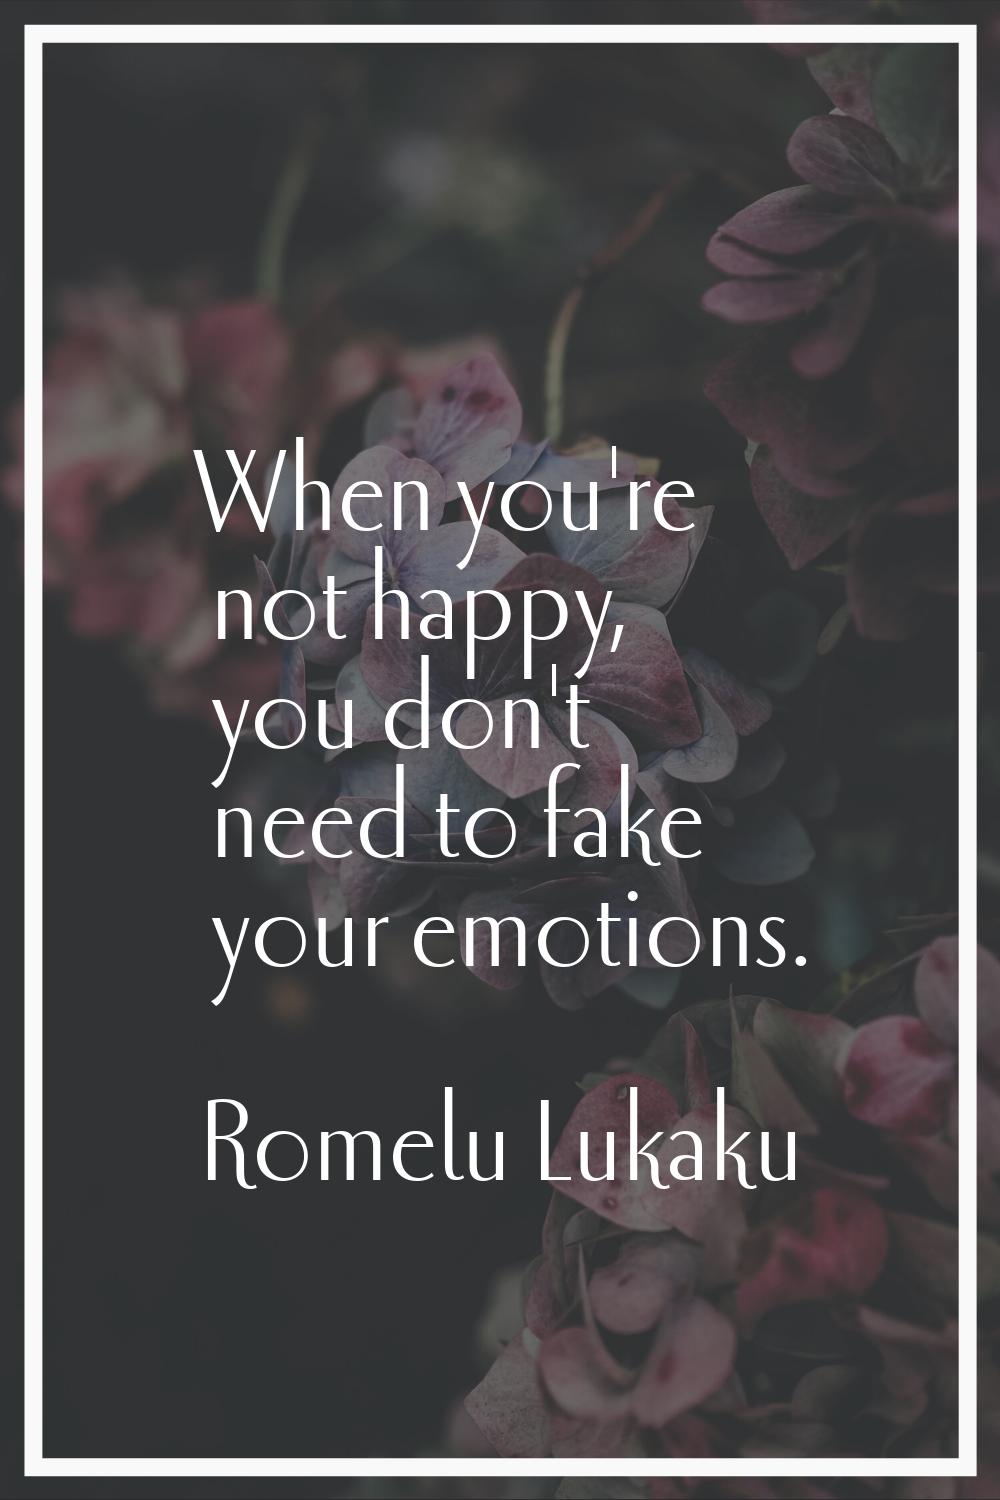 When you're not happy, you don't need to fake your emotions.